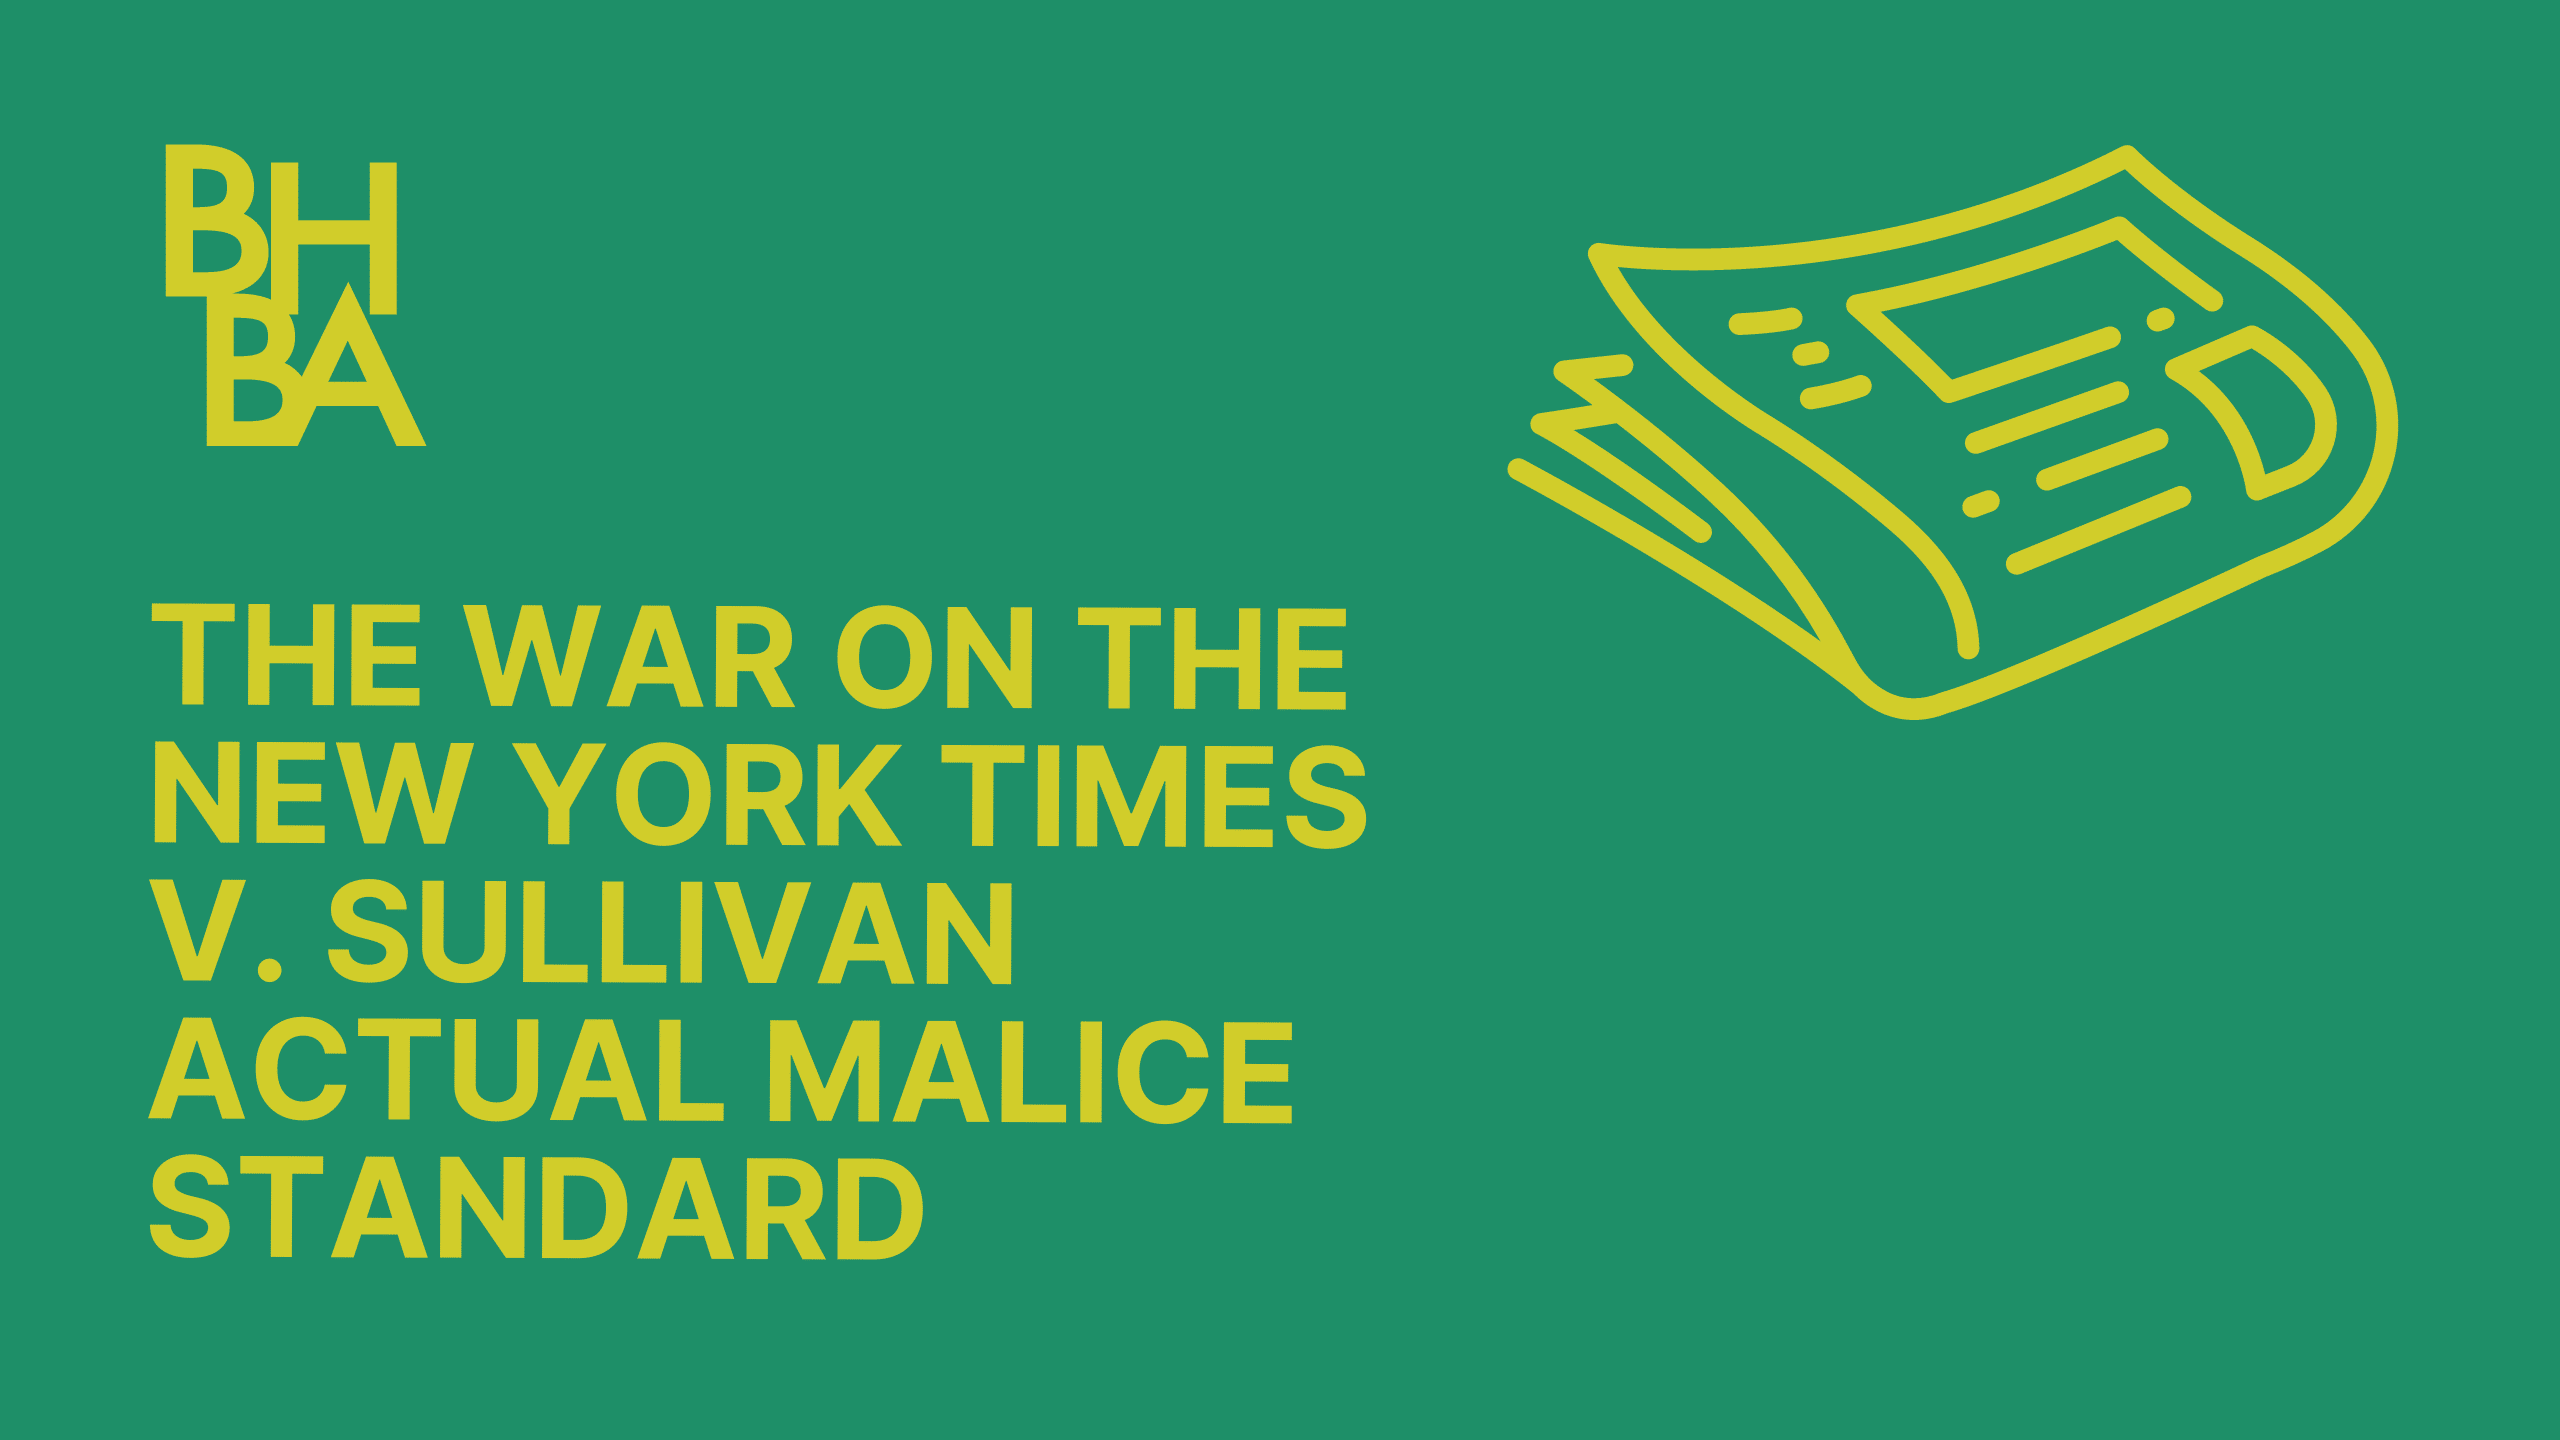 The War on the New York Times v. Sullivan Actual Malice Standard